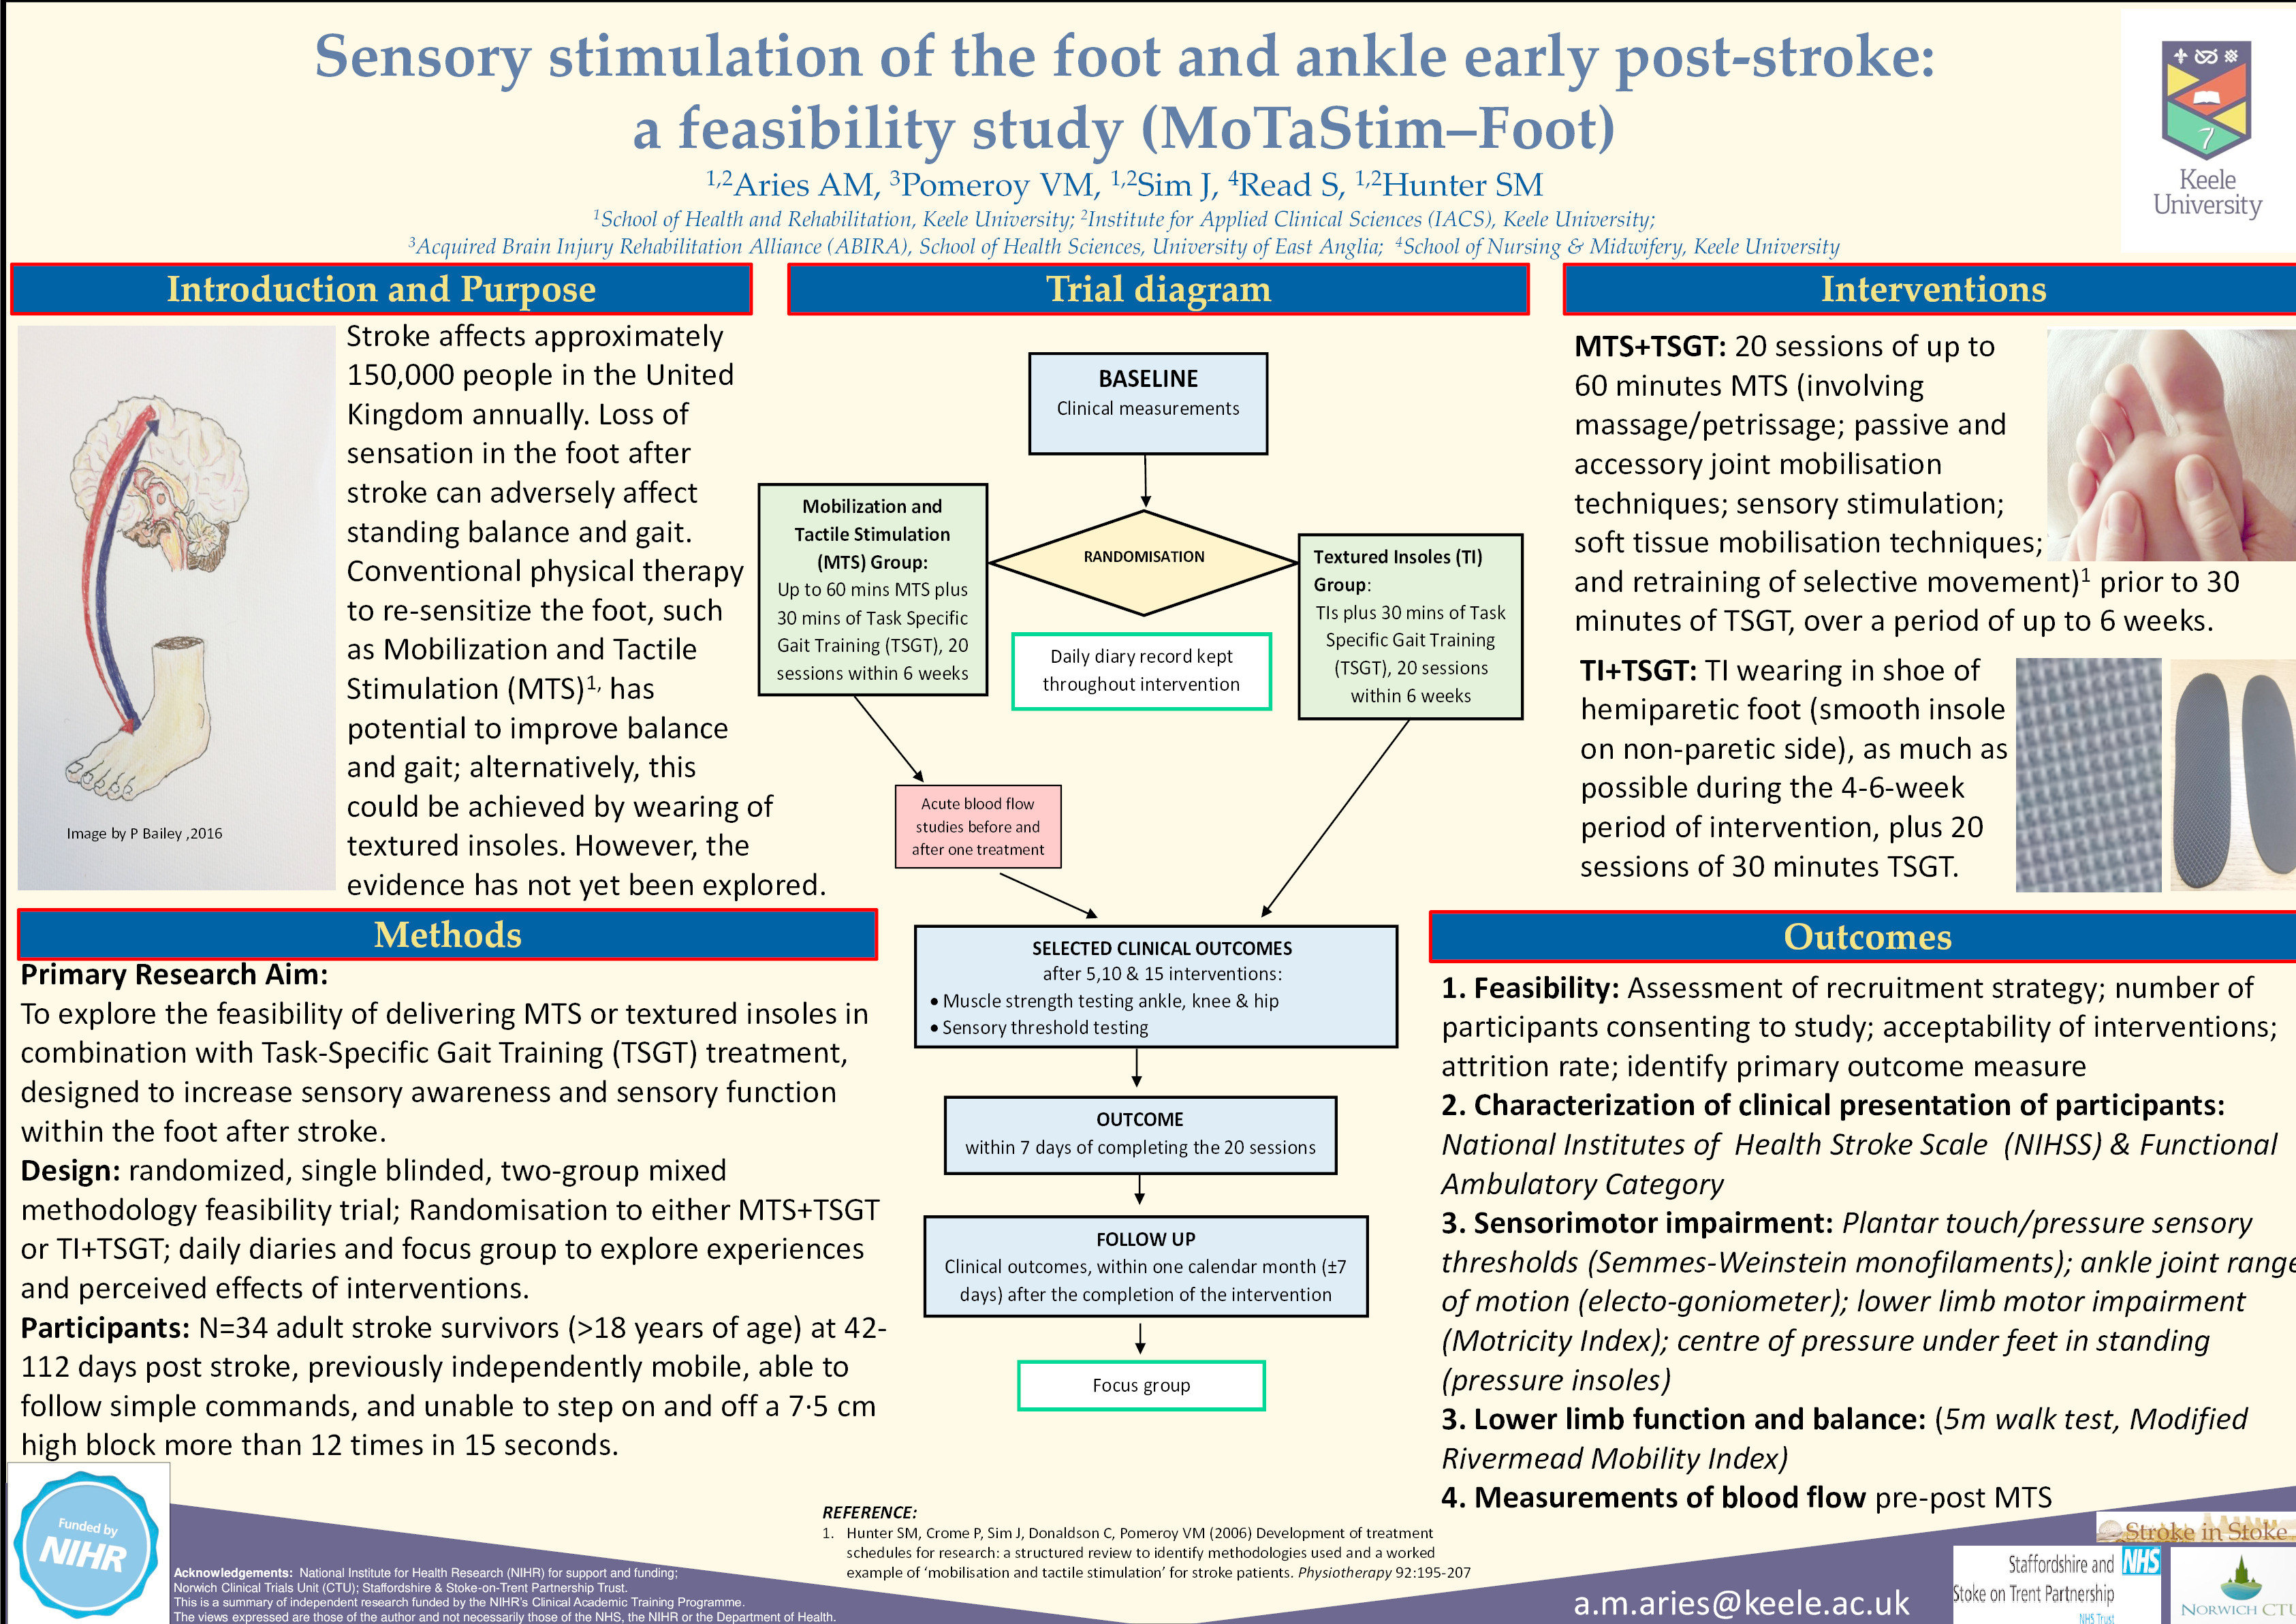 Sensory stimulation of the foot and ankle early post-stroke: A feasibility study (MoTaStim – Foot) Thumbnail